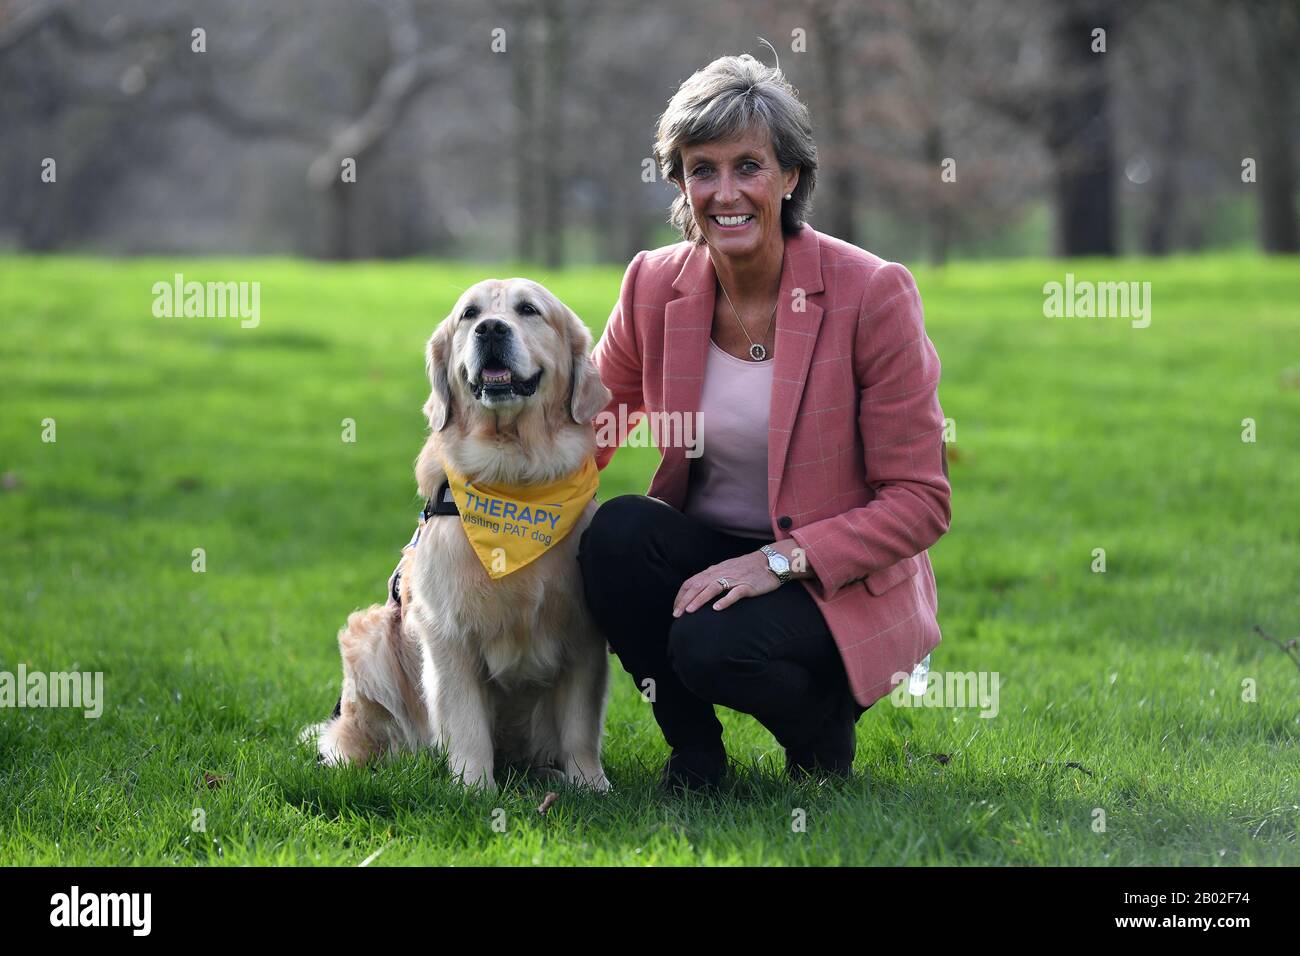 Lyndsey Uglow with her dog Leo, one of the finalists for Friends for Life 2020, at a launch event for this year's Crufts and Friends for Life in Green Park, London. Stock Photo